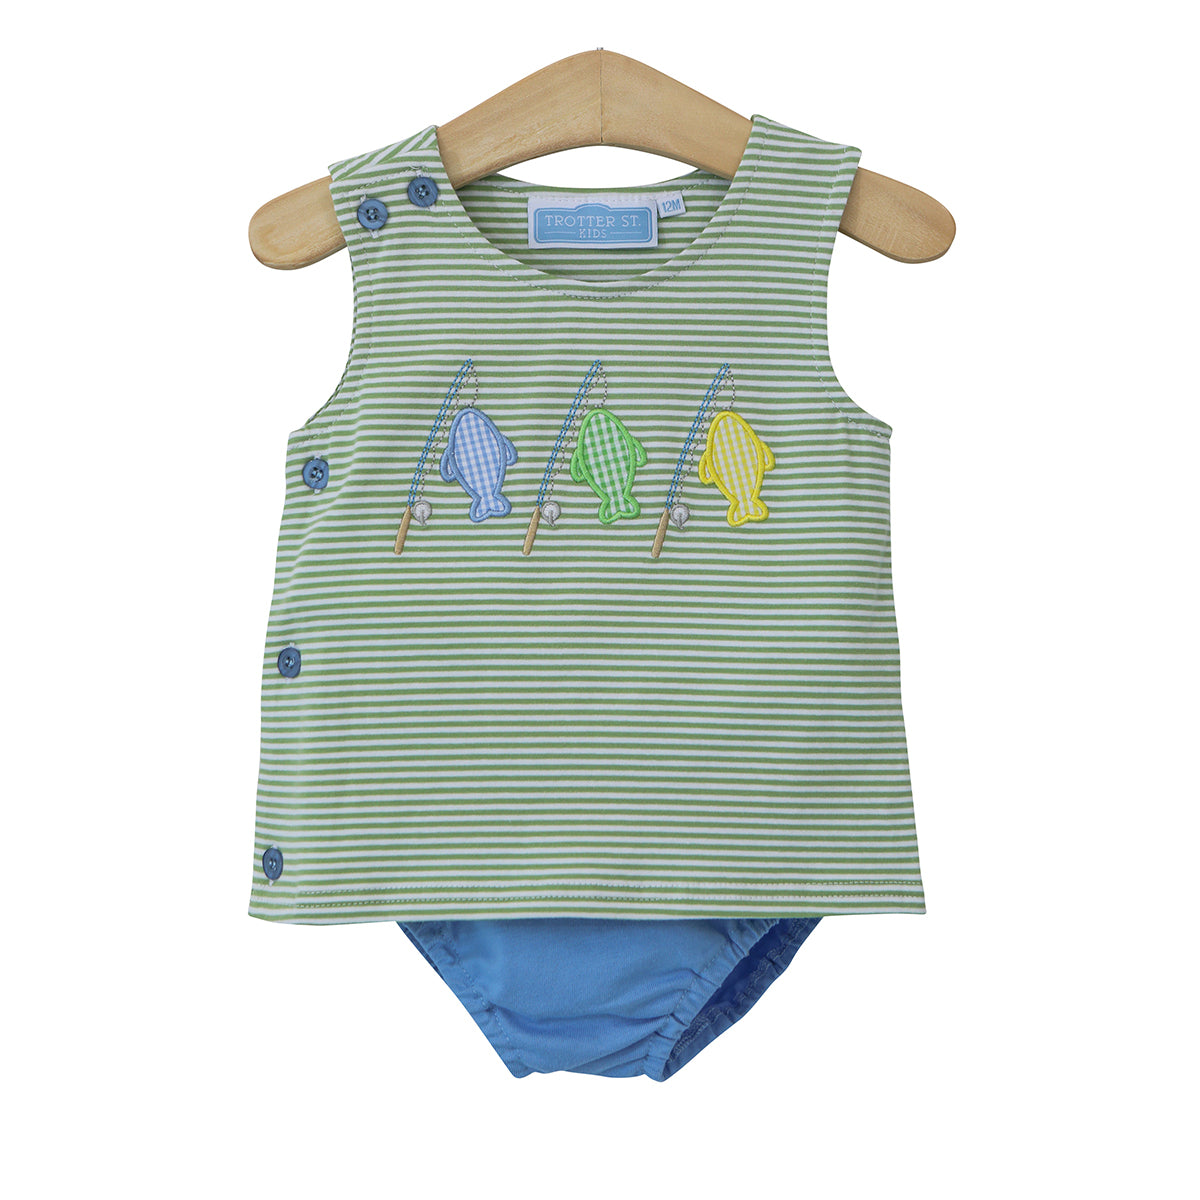 Baby Boy's Appliqued Hooked on Fishing Diaper Set